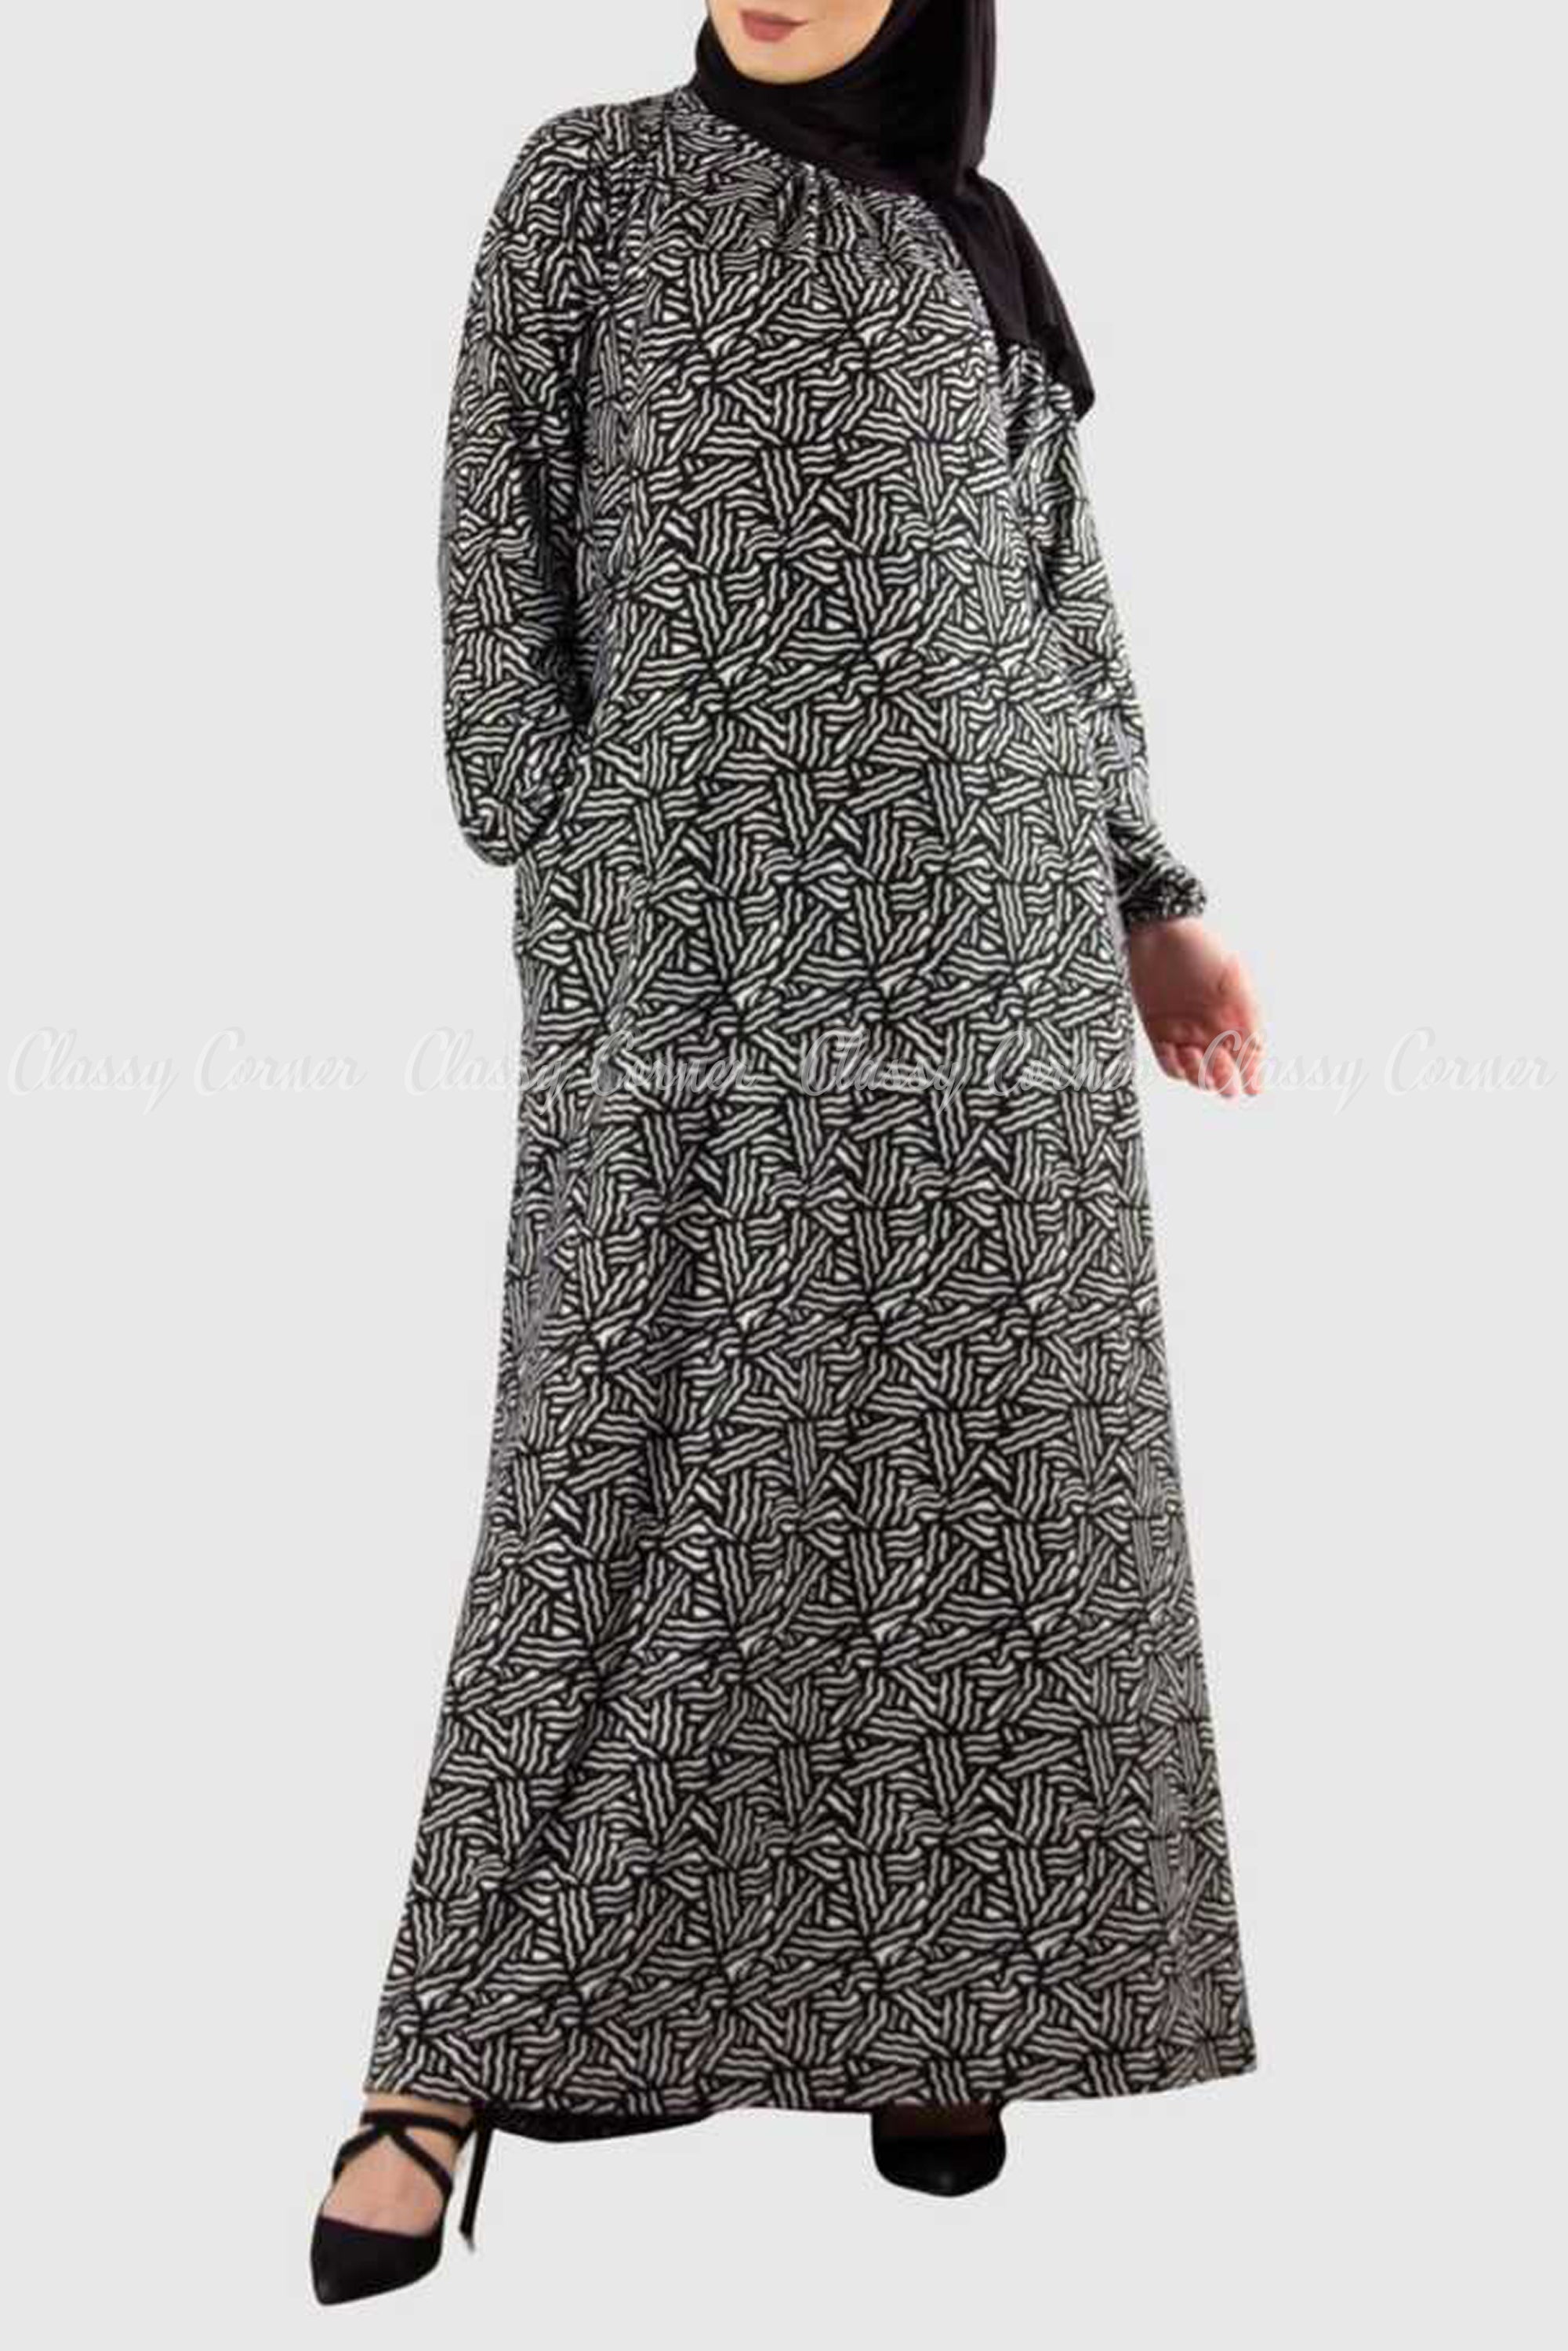 Black and White Abstract Line Print Long Dress